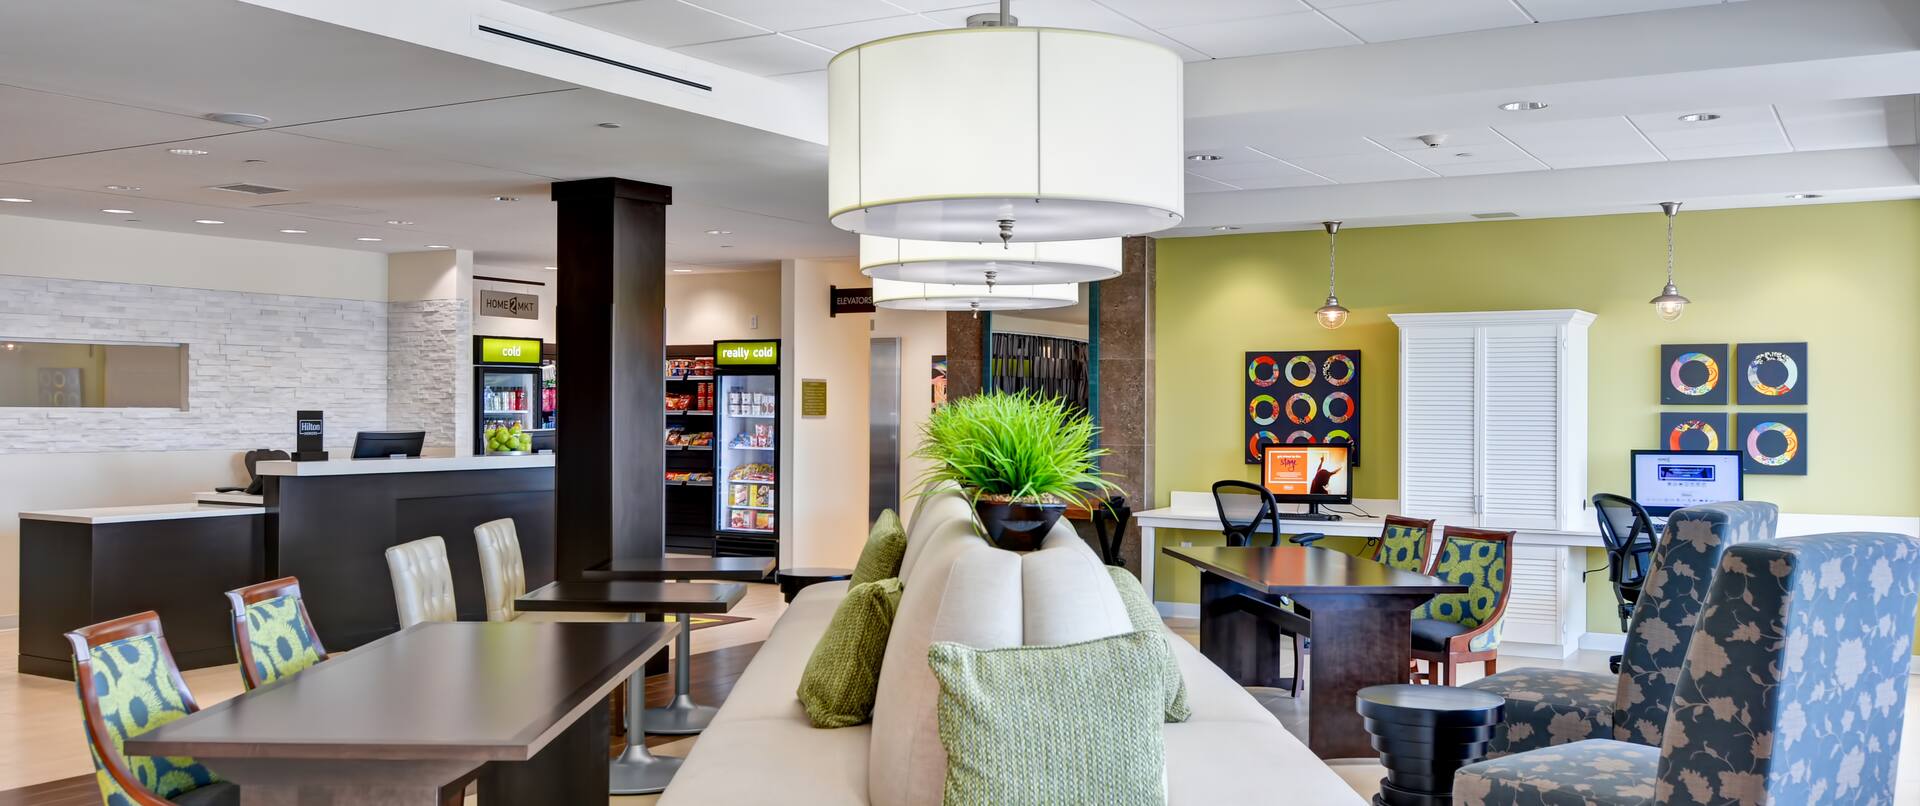 Home2 Suites by Hilton Azusa Hotel, CA - Lobby